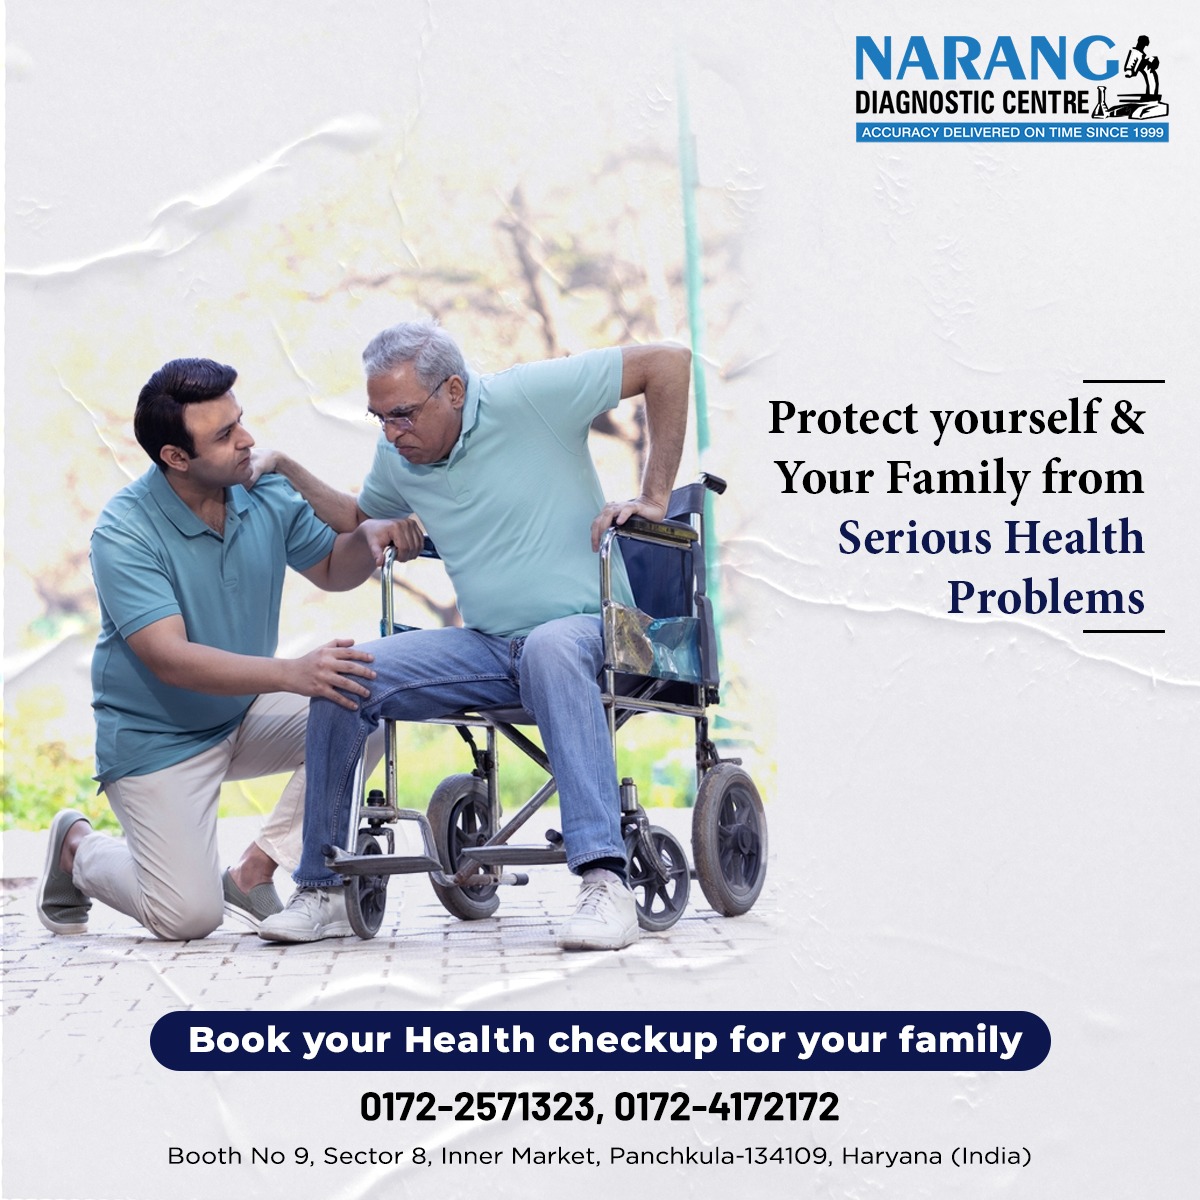 Prevent yourself and your loved ones from serious health issues. Make an appointment for your family's health checkup.

Book your 𝐇𝐞𝐚𝐥𝐭𝐡 𝐂𝐡𝐞𝐜𝐤-𝐮𝐩 for your family- 0172-2571323 or 0172-4172172

#Healthcheckup #Healthpackage #Diagnosticcentre #Trusteddiagnosticcentre